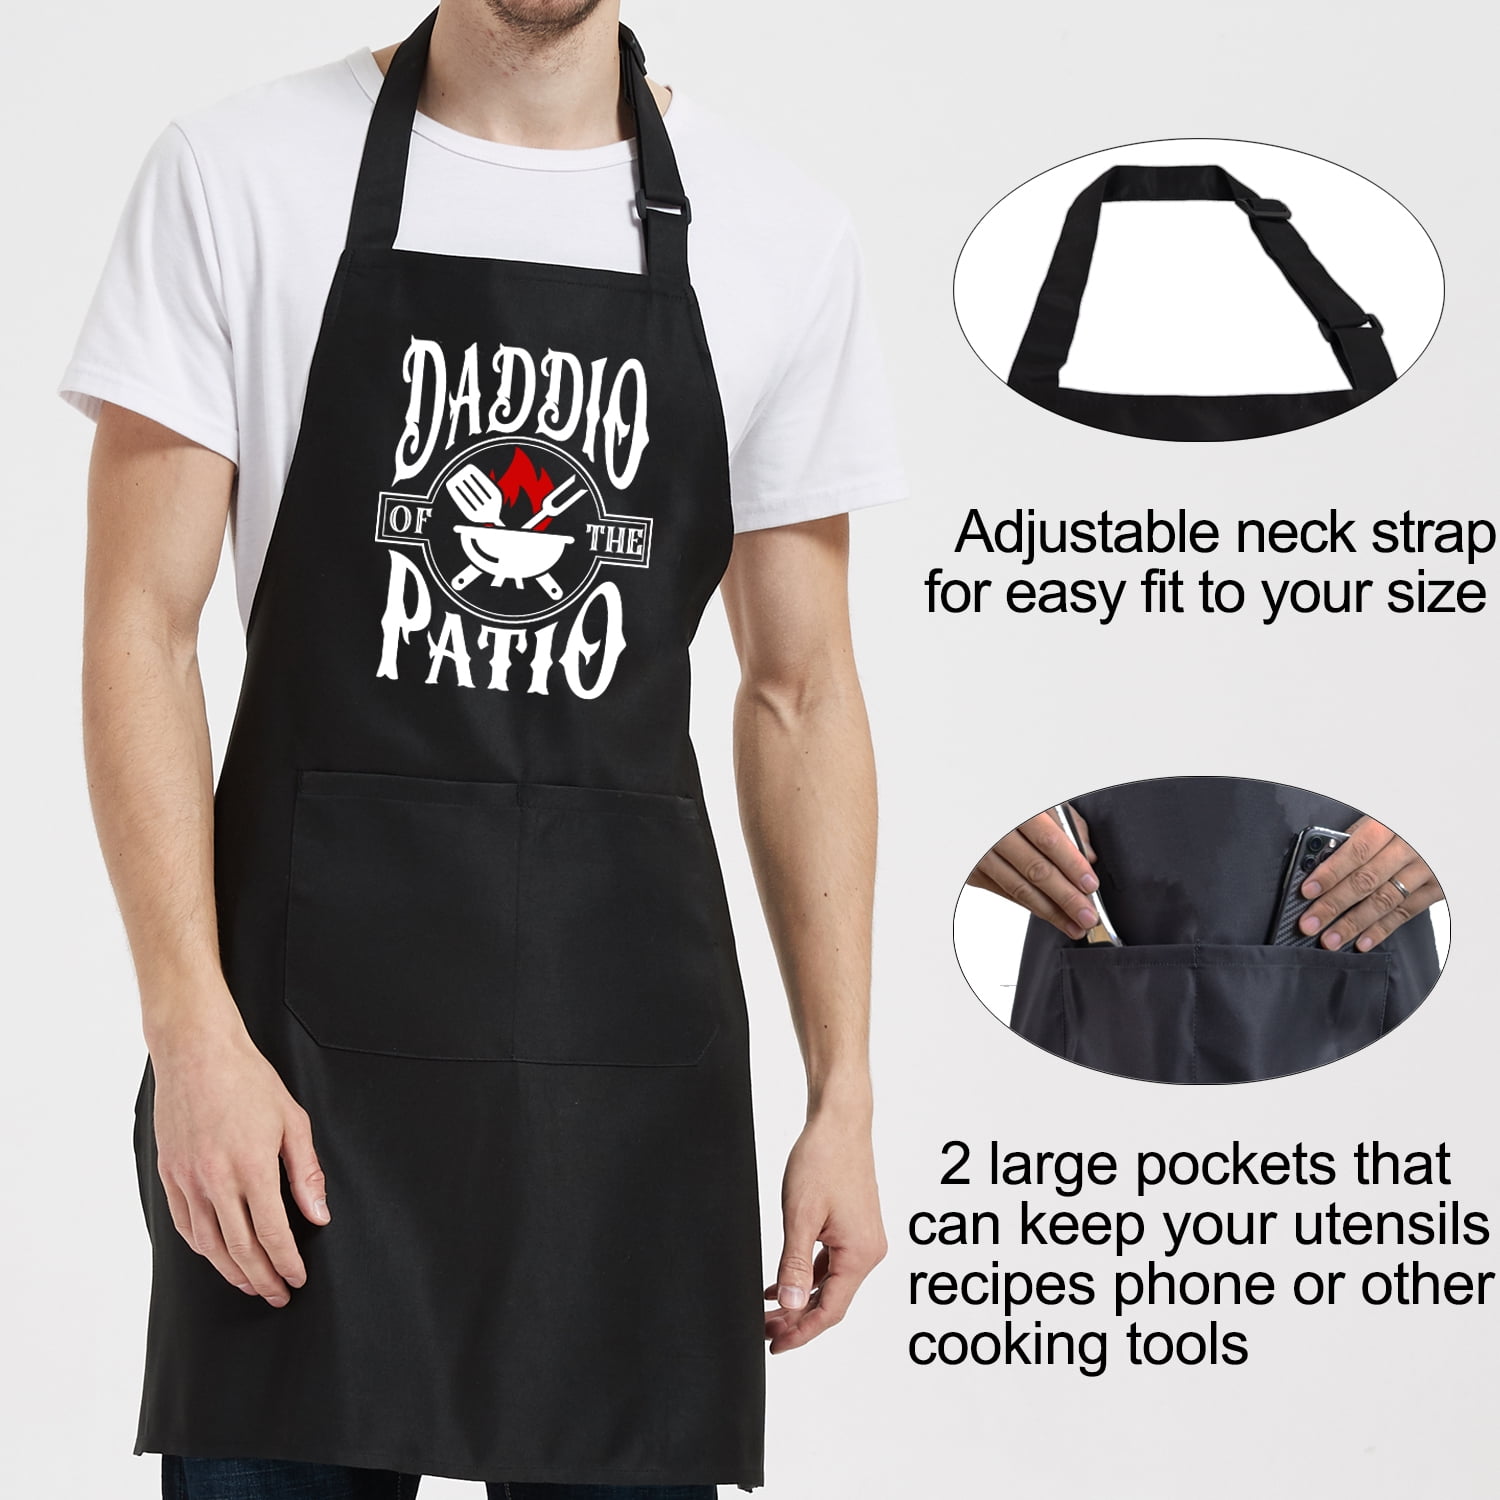 Rosoz Funny BBQ Black Chef Aprons for Men, Grill Master, Adjustable Kitchen  Cooking Aprons with Pocket Waterproof Oil Proof Father's Day/Birthday